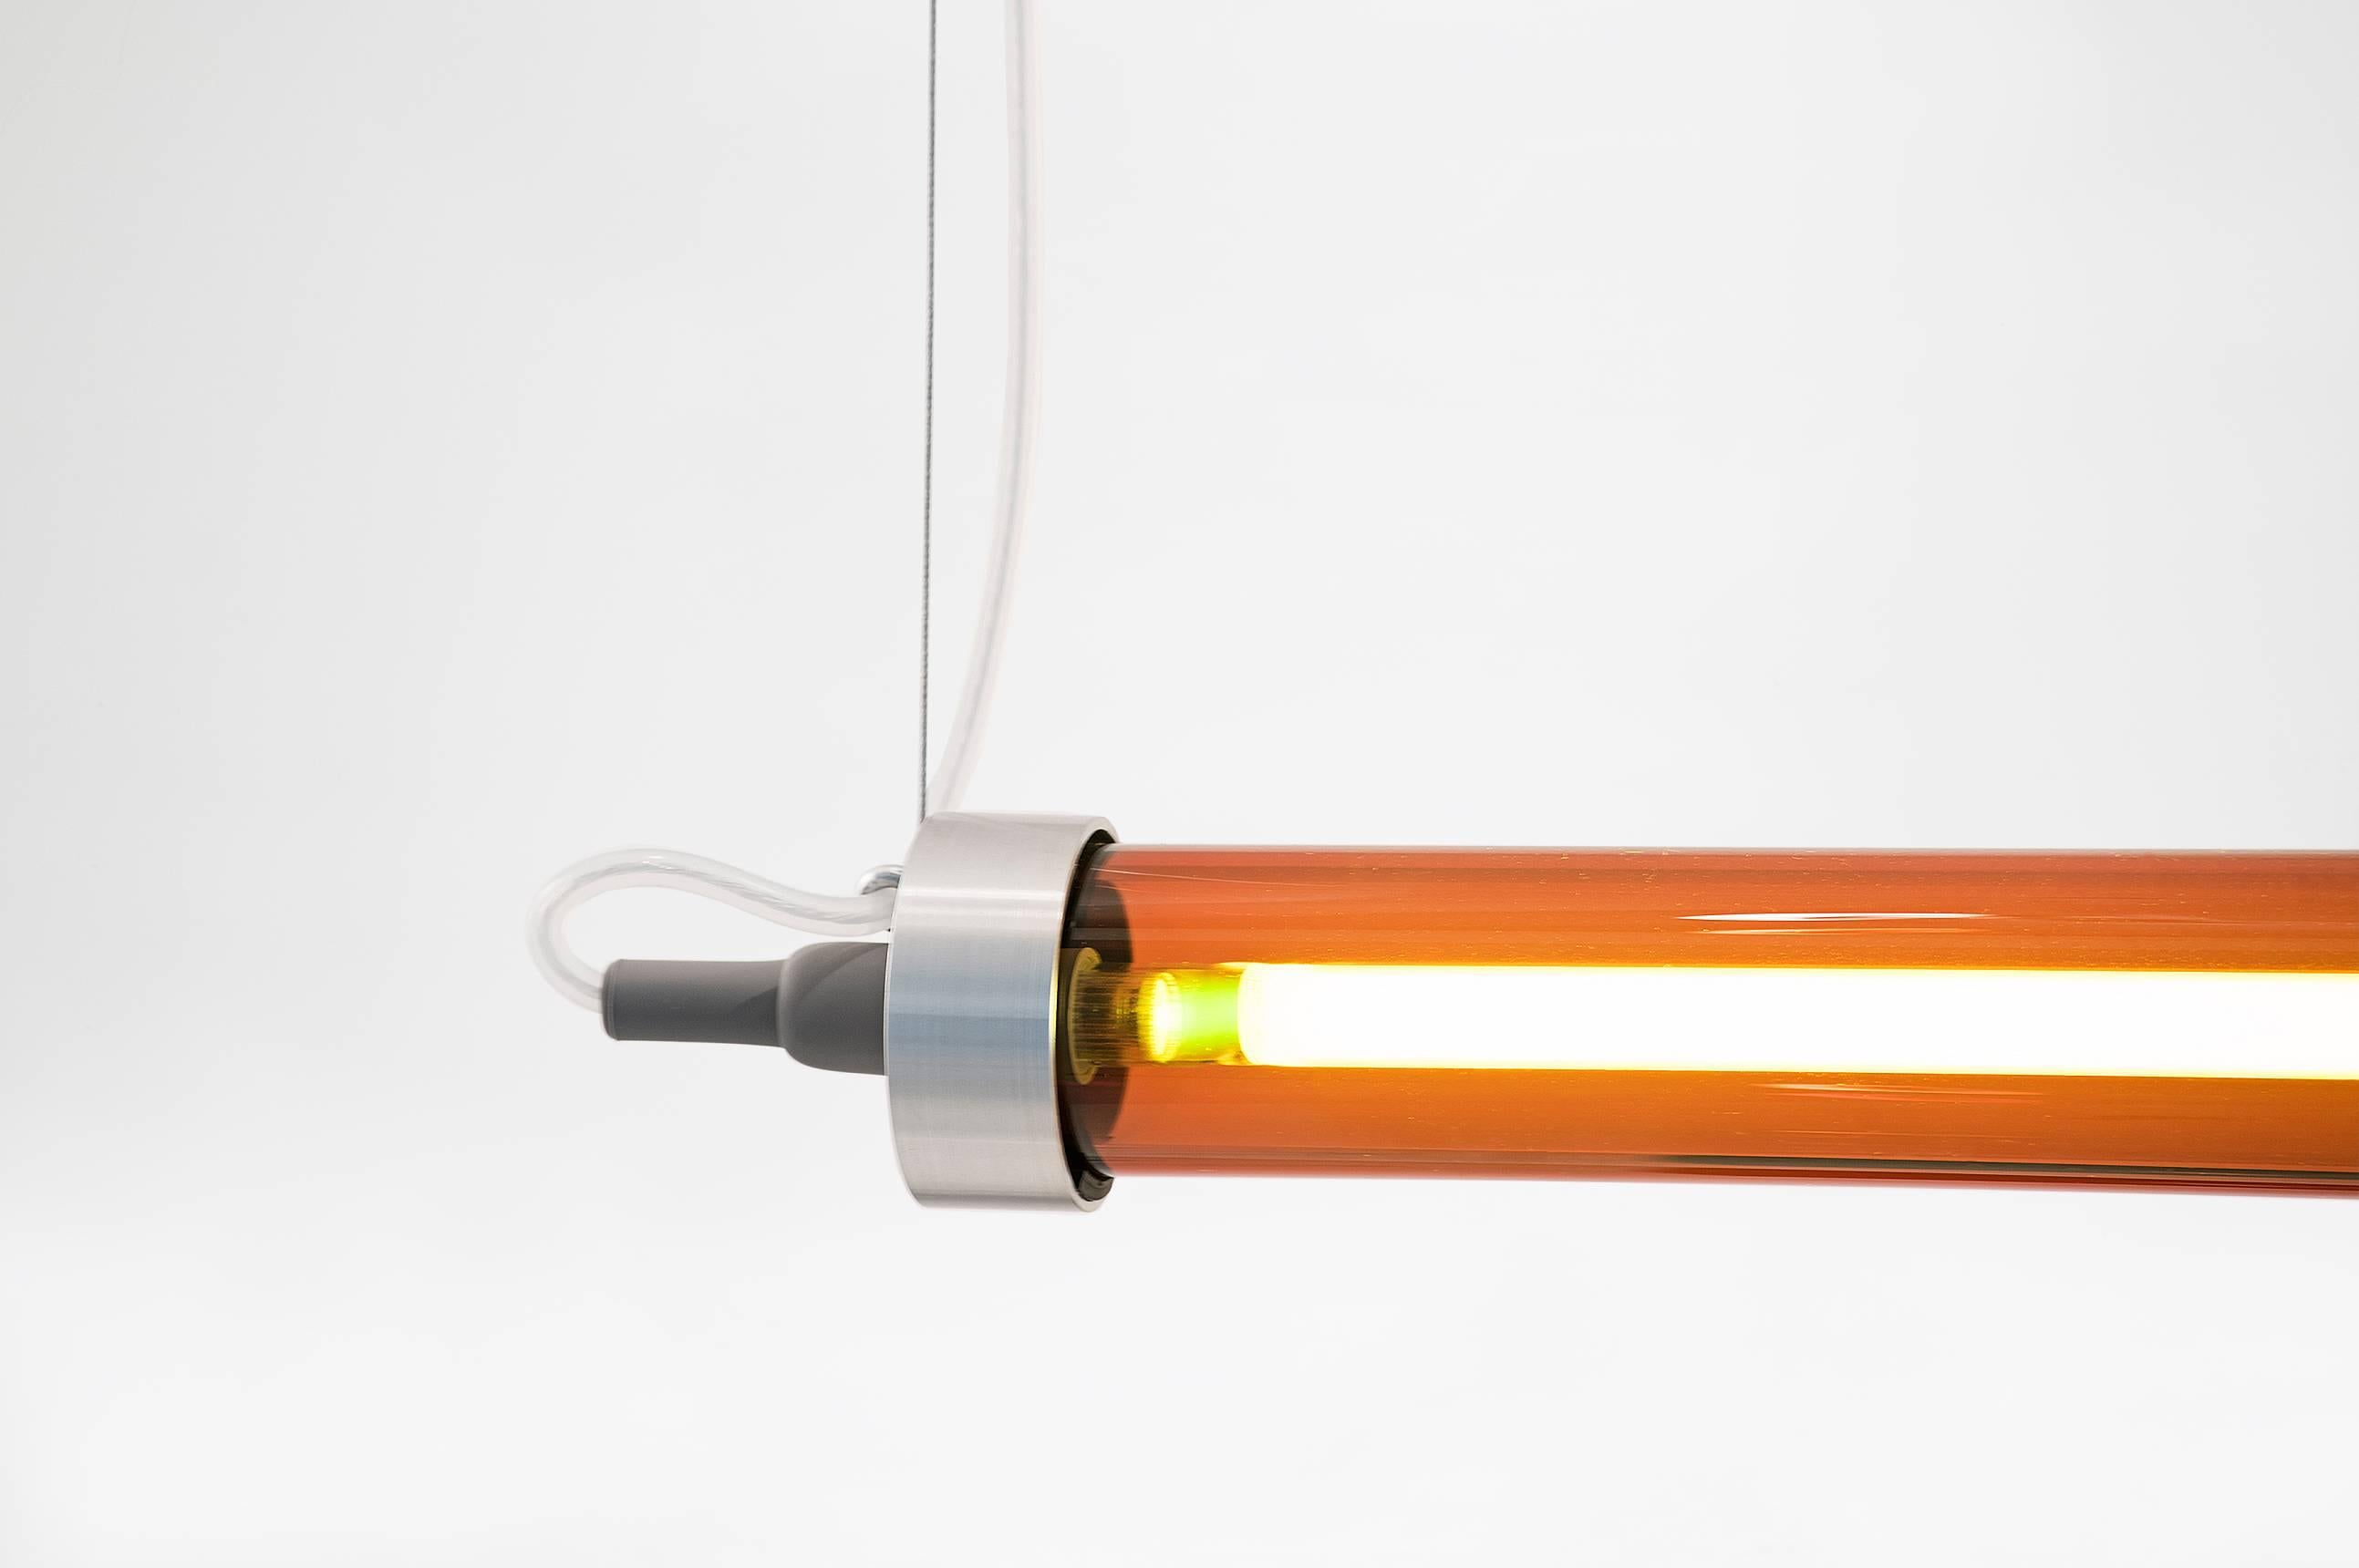 Sabine Marcelis

Ceiling lamp model “Horizontal Amber”
From the series “RAY”
Manufactured by Sabine Marcelis
Produced in exclusive for side gallery
Rotterdam, The Netherlands 2017
Colored glass tube in amber, white neon

Measurements
120